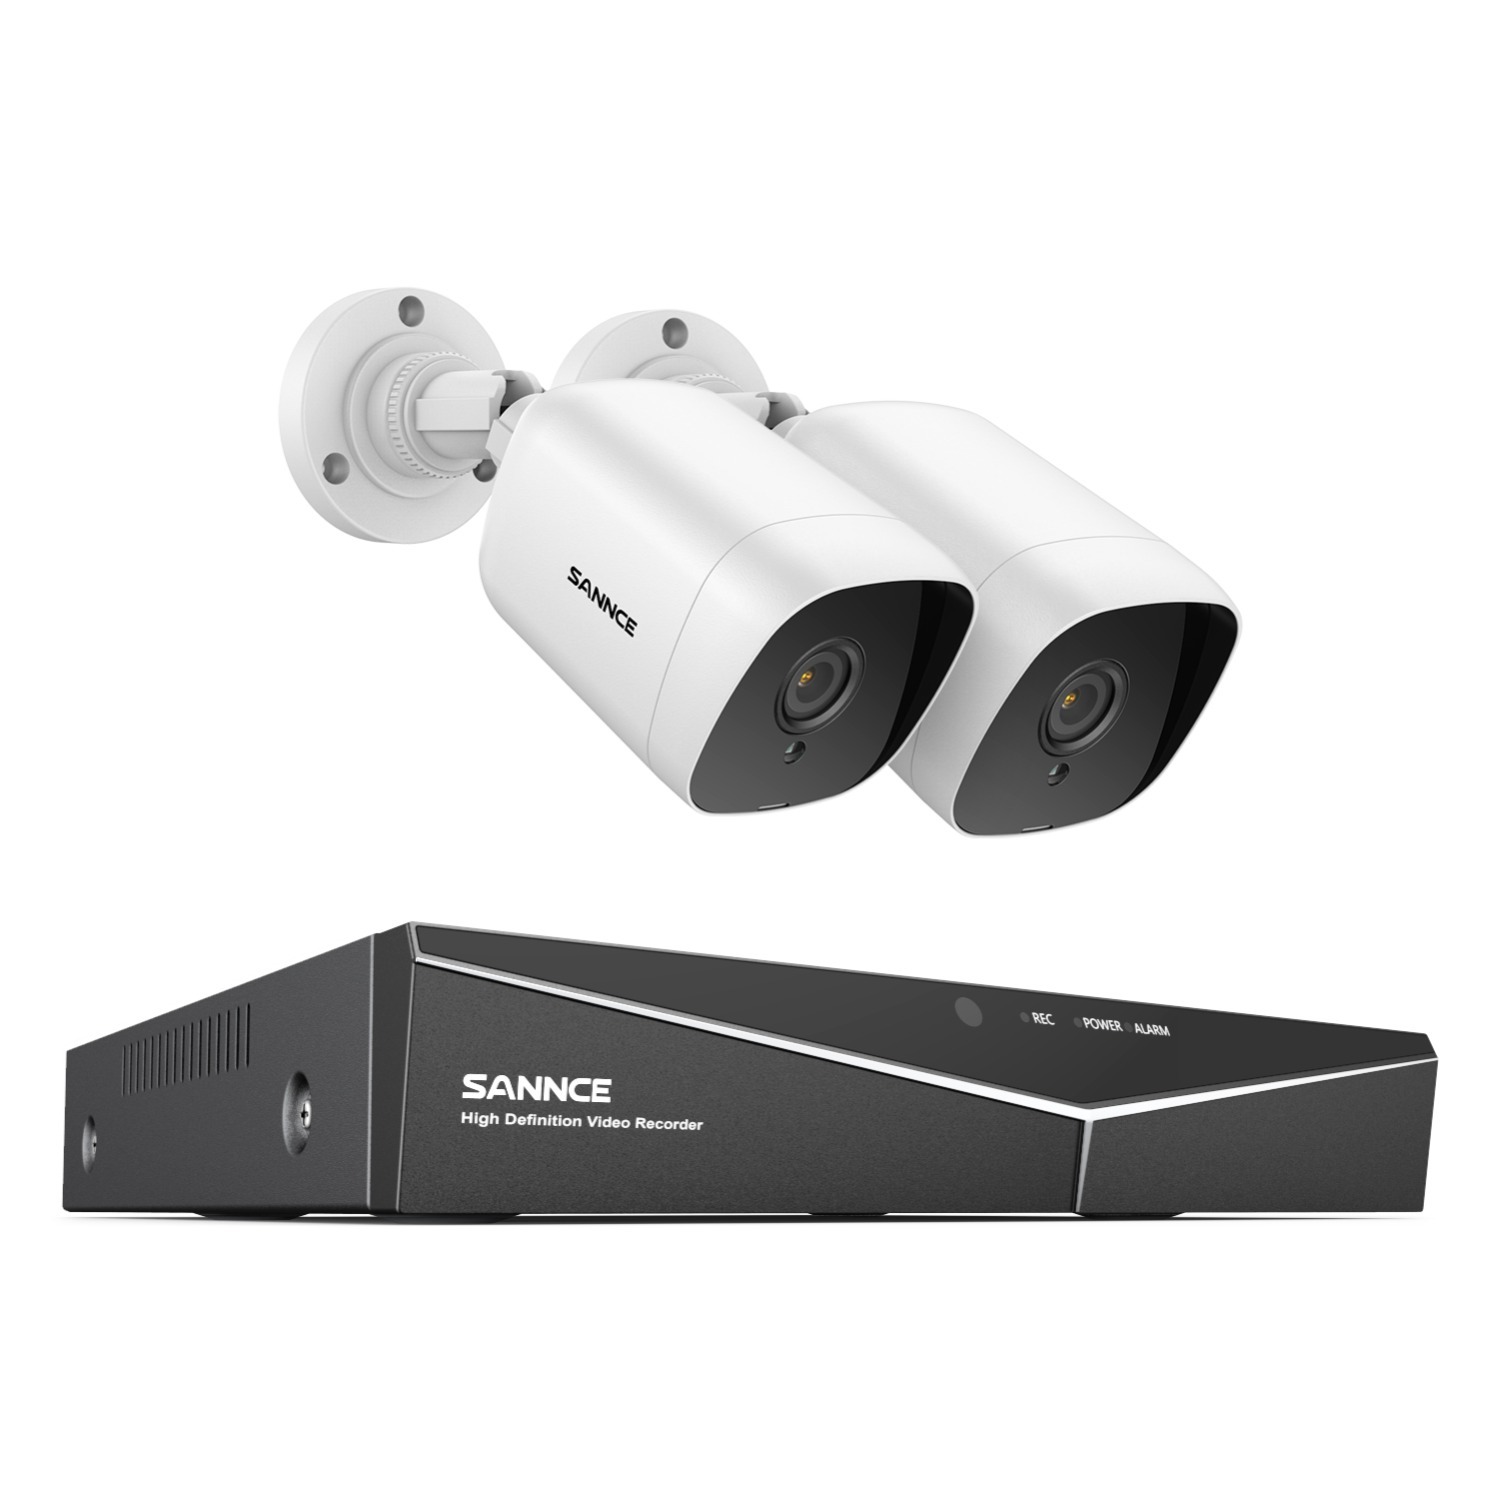 SANNCE 2-Pack H.264+ 1080P 4 Channel Security DVR System 2MP Outdoor Cameras $65 + Free S&H